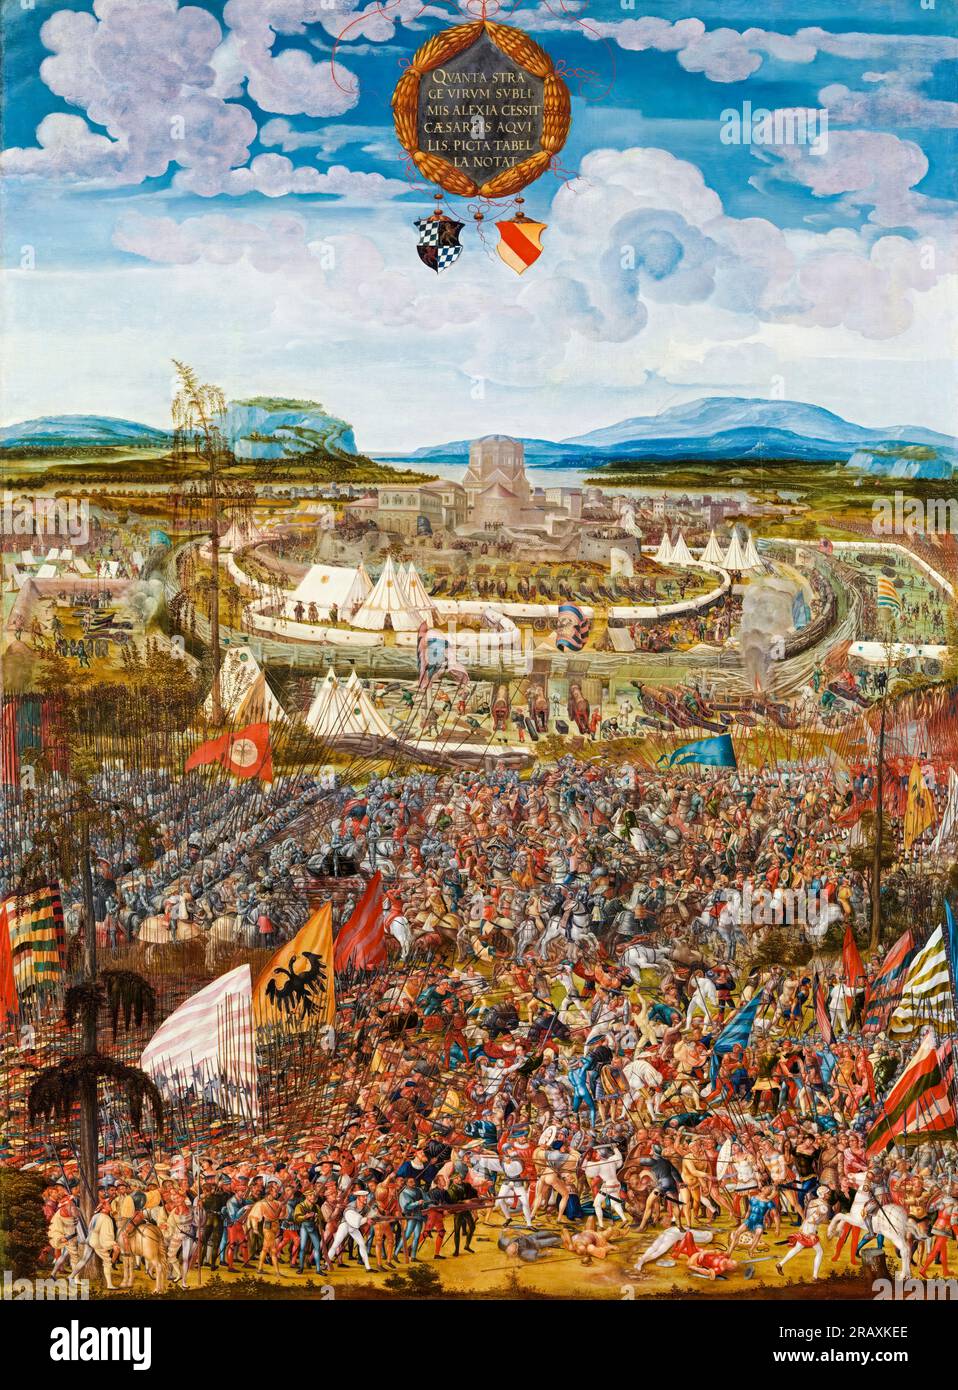 Melchior Feselen, The Siege of the City of Alesia (Battle of Alesia), painting in oil on wood, 1533 Stock Photo